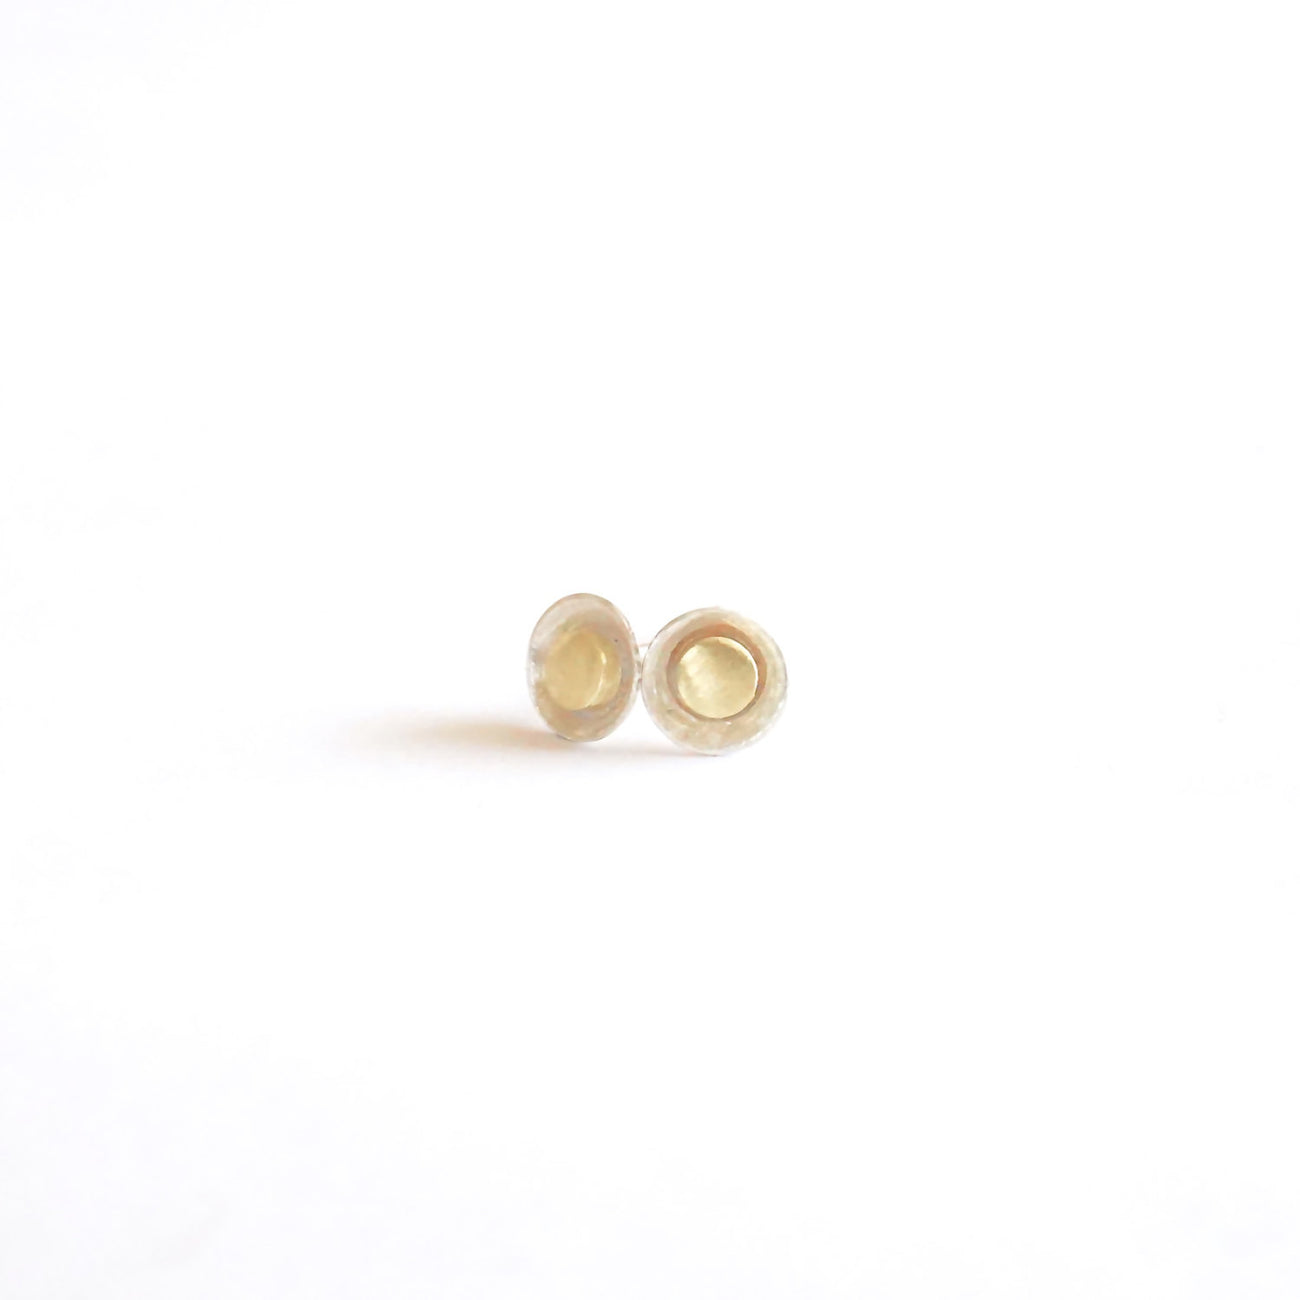 Stylish Hand-Made Silver Stud Earrings with a Solid Mini Brass Button in the Center - 0196 - Virginia Wynne Designs